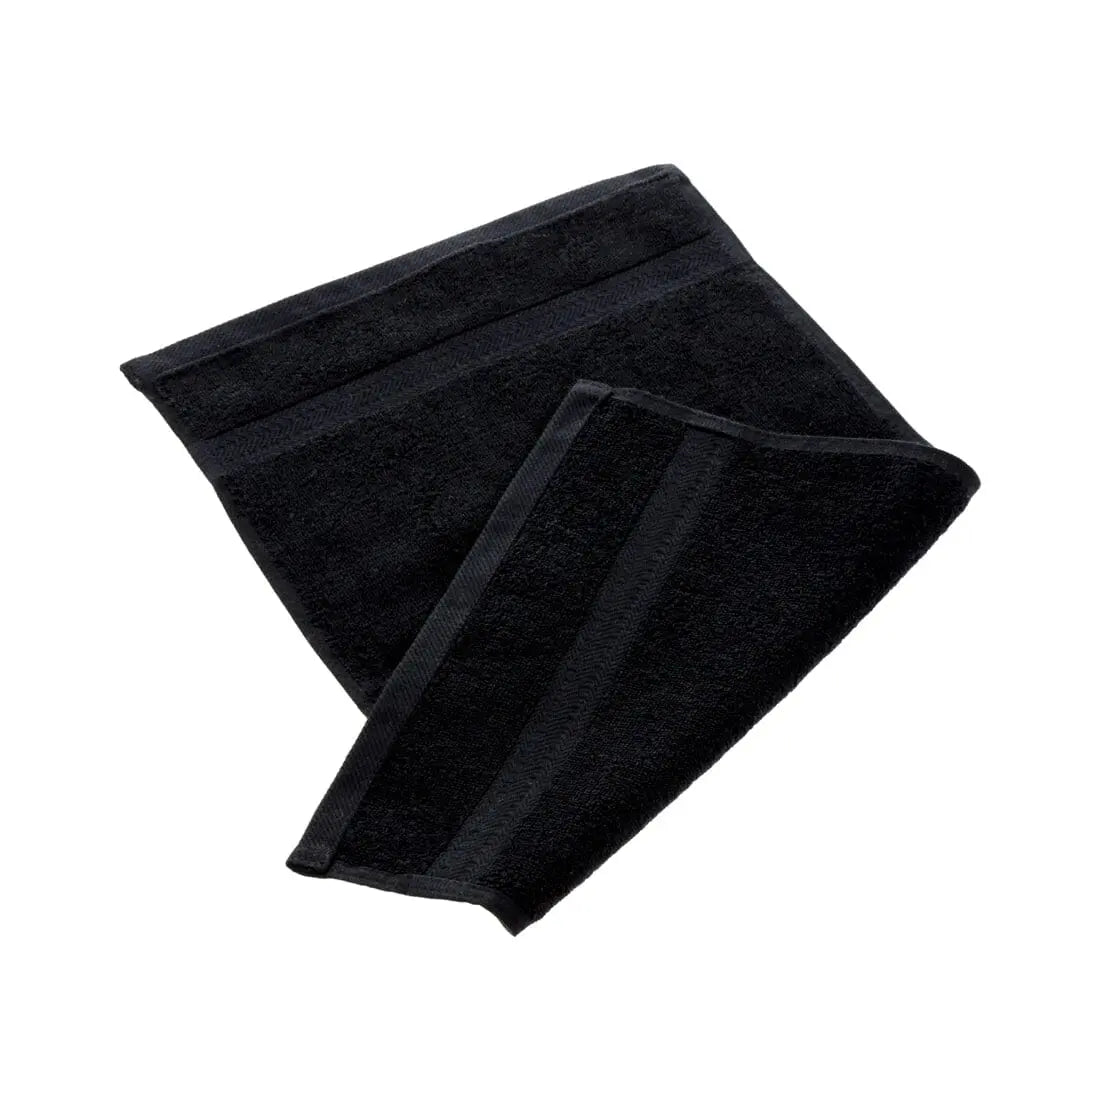 Black egyptian cotton towel ideal for the gym